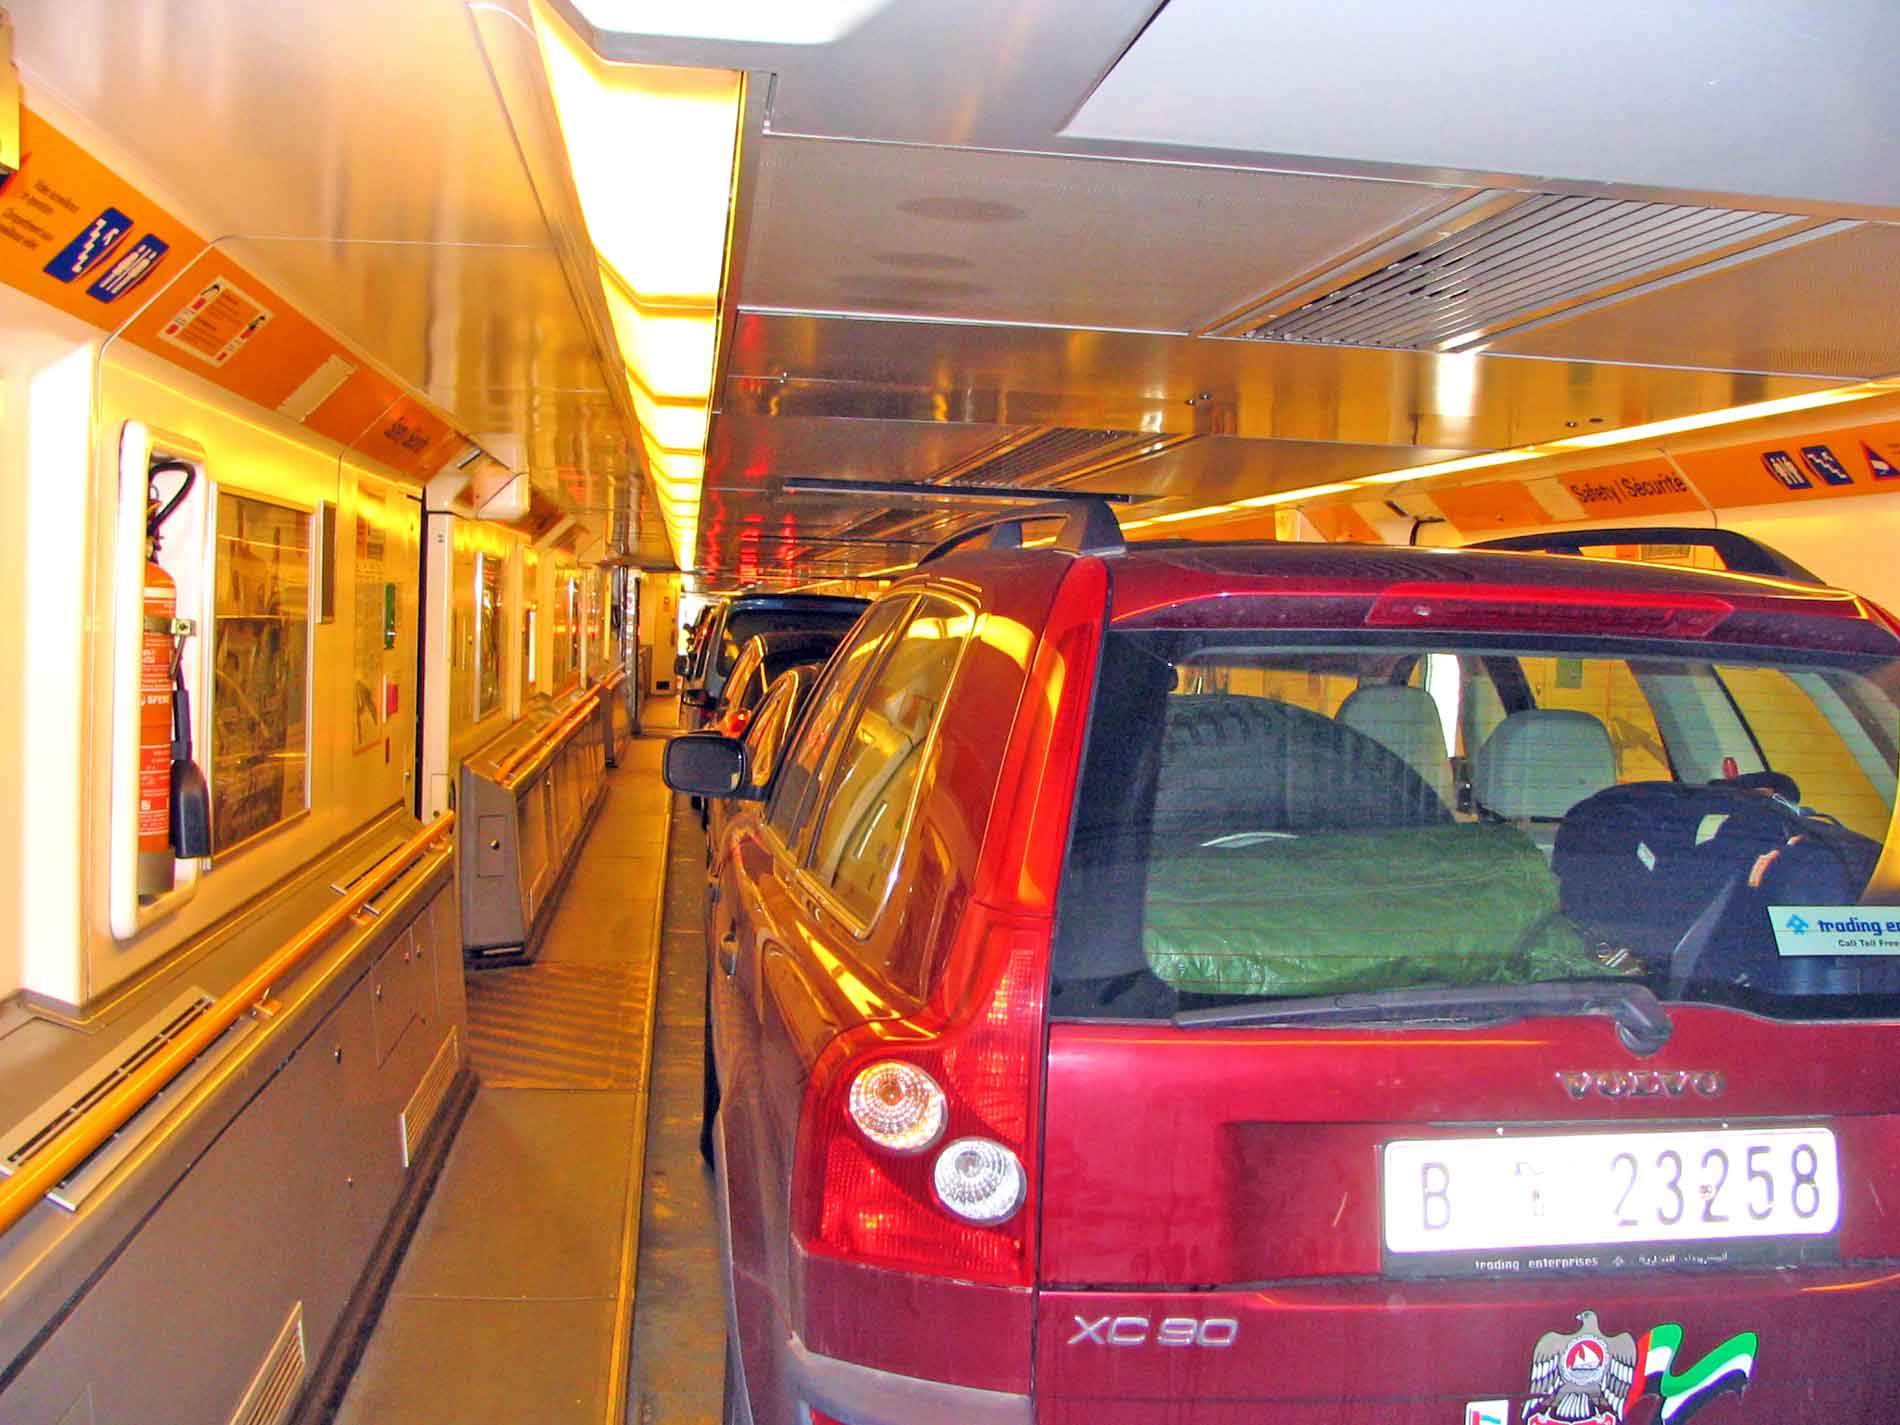 The Car About To Disembark From The Channel Tunnel Train Upon My Arrival Home in England